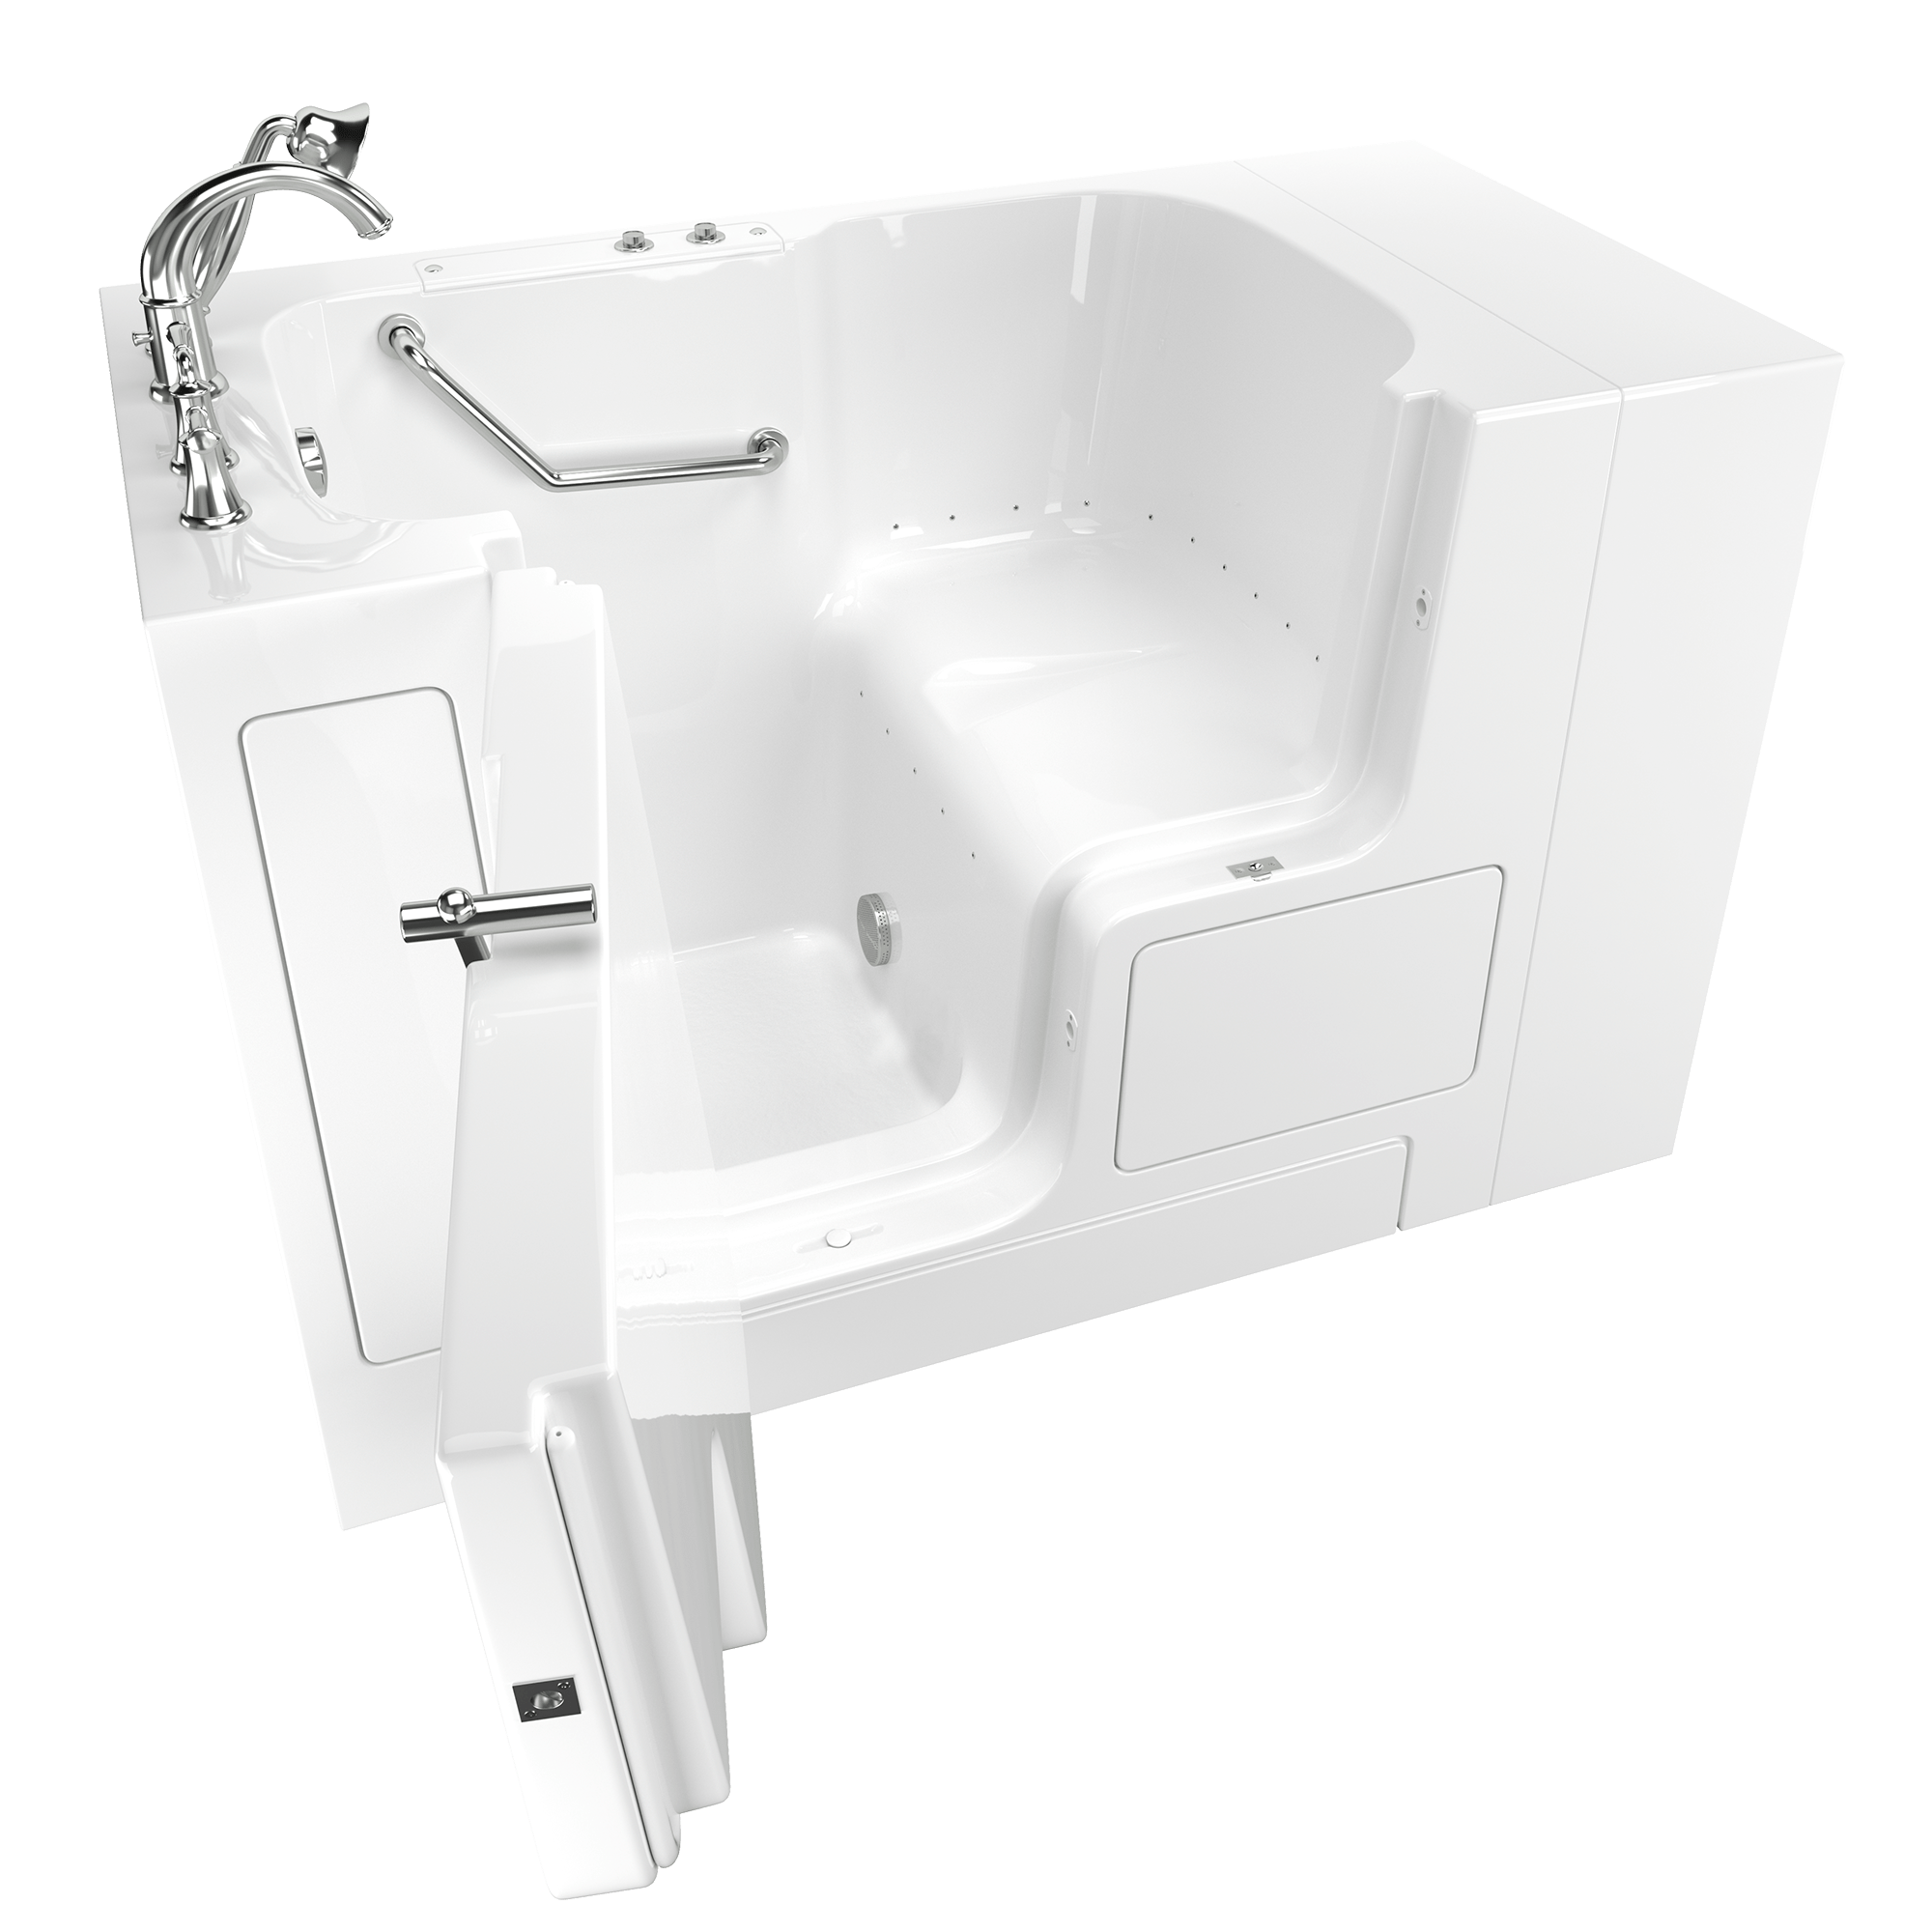 Gelcoat Value Series 32 x 52 -Inch Walk-in Tub With Air Spa System - Left-Hand Drain With Faucet